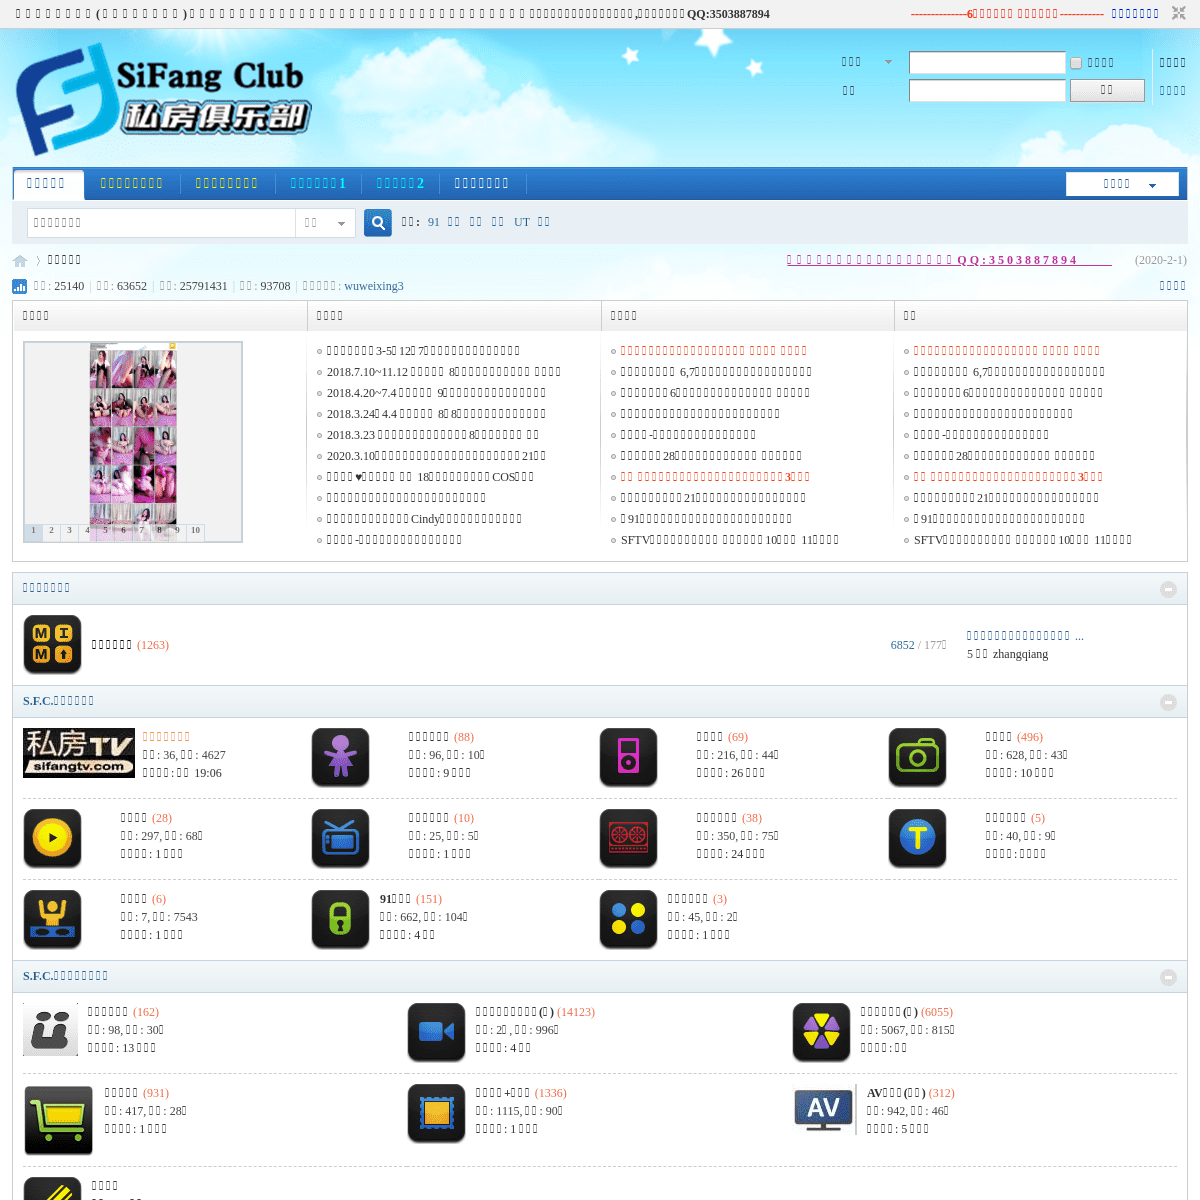 A complete backup of sifangclub.com